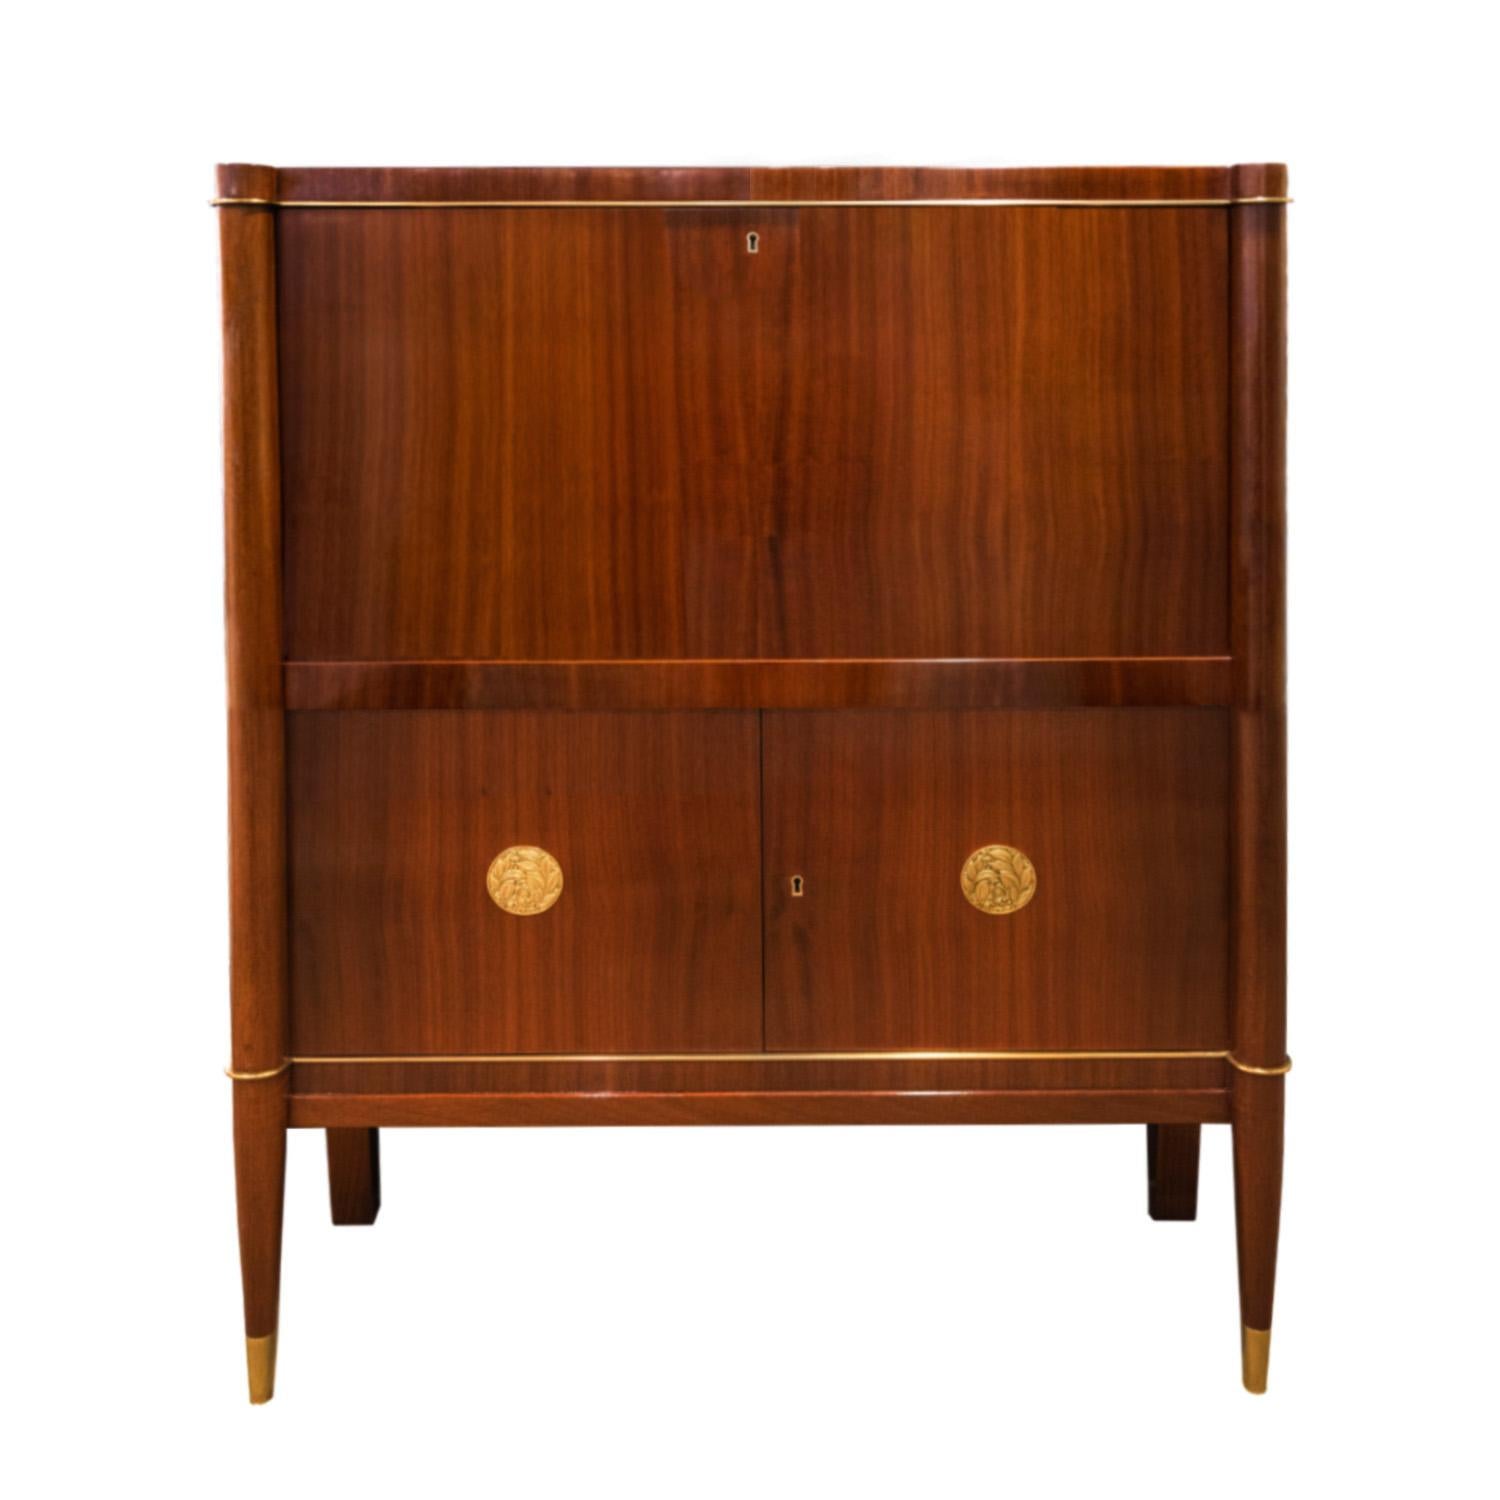 Stunning Art Deco cabinet from the Voltaire Series with drop down front in mahogany with 2 artisan bronze medallions, sabots and trim by De Coene Freres, Belgium 1930s. This can be used as a secretary or bar cabinet. The craftsmanship and attention